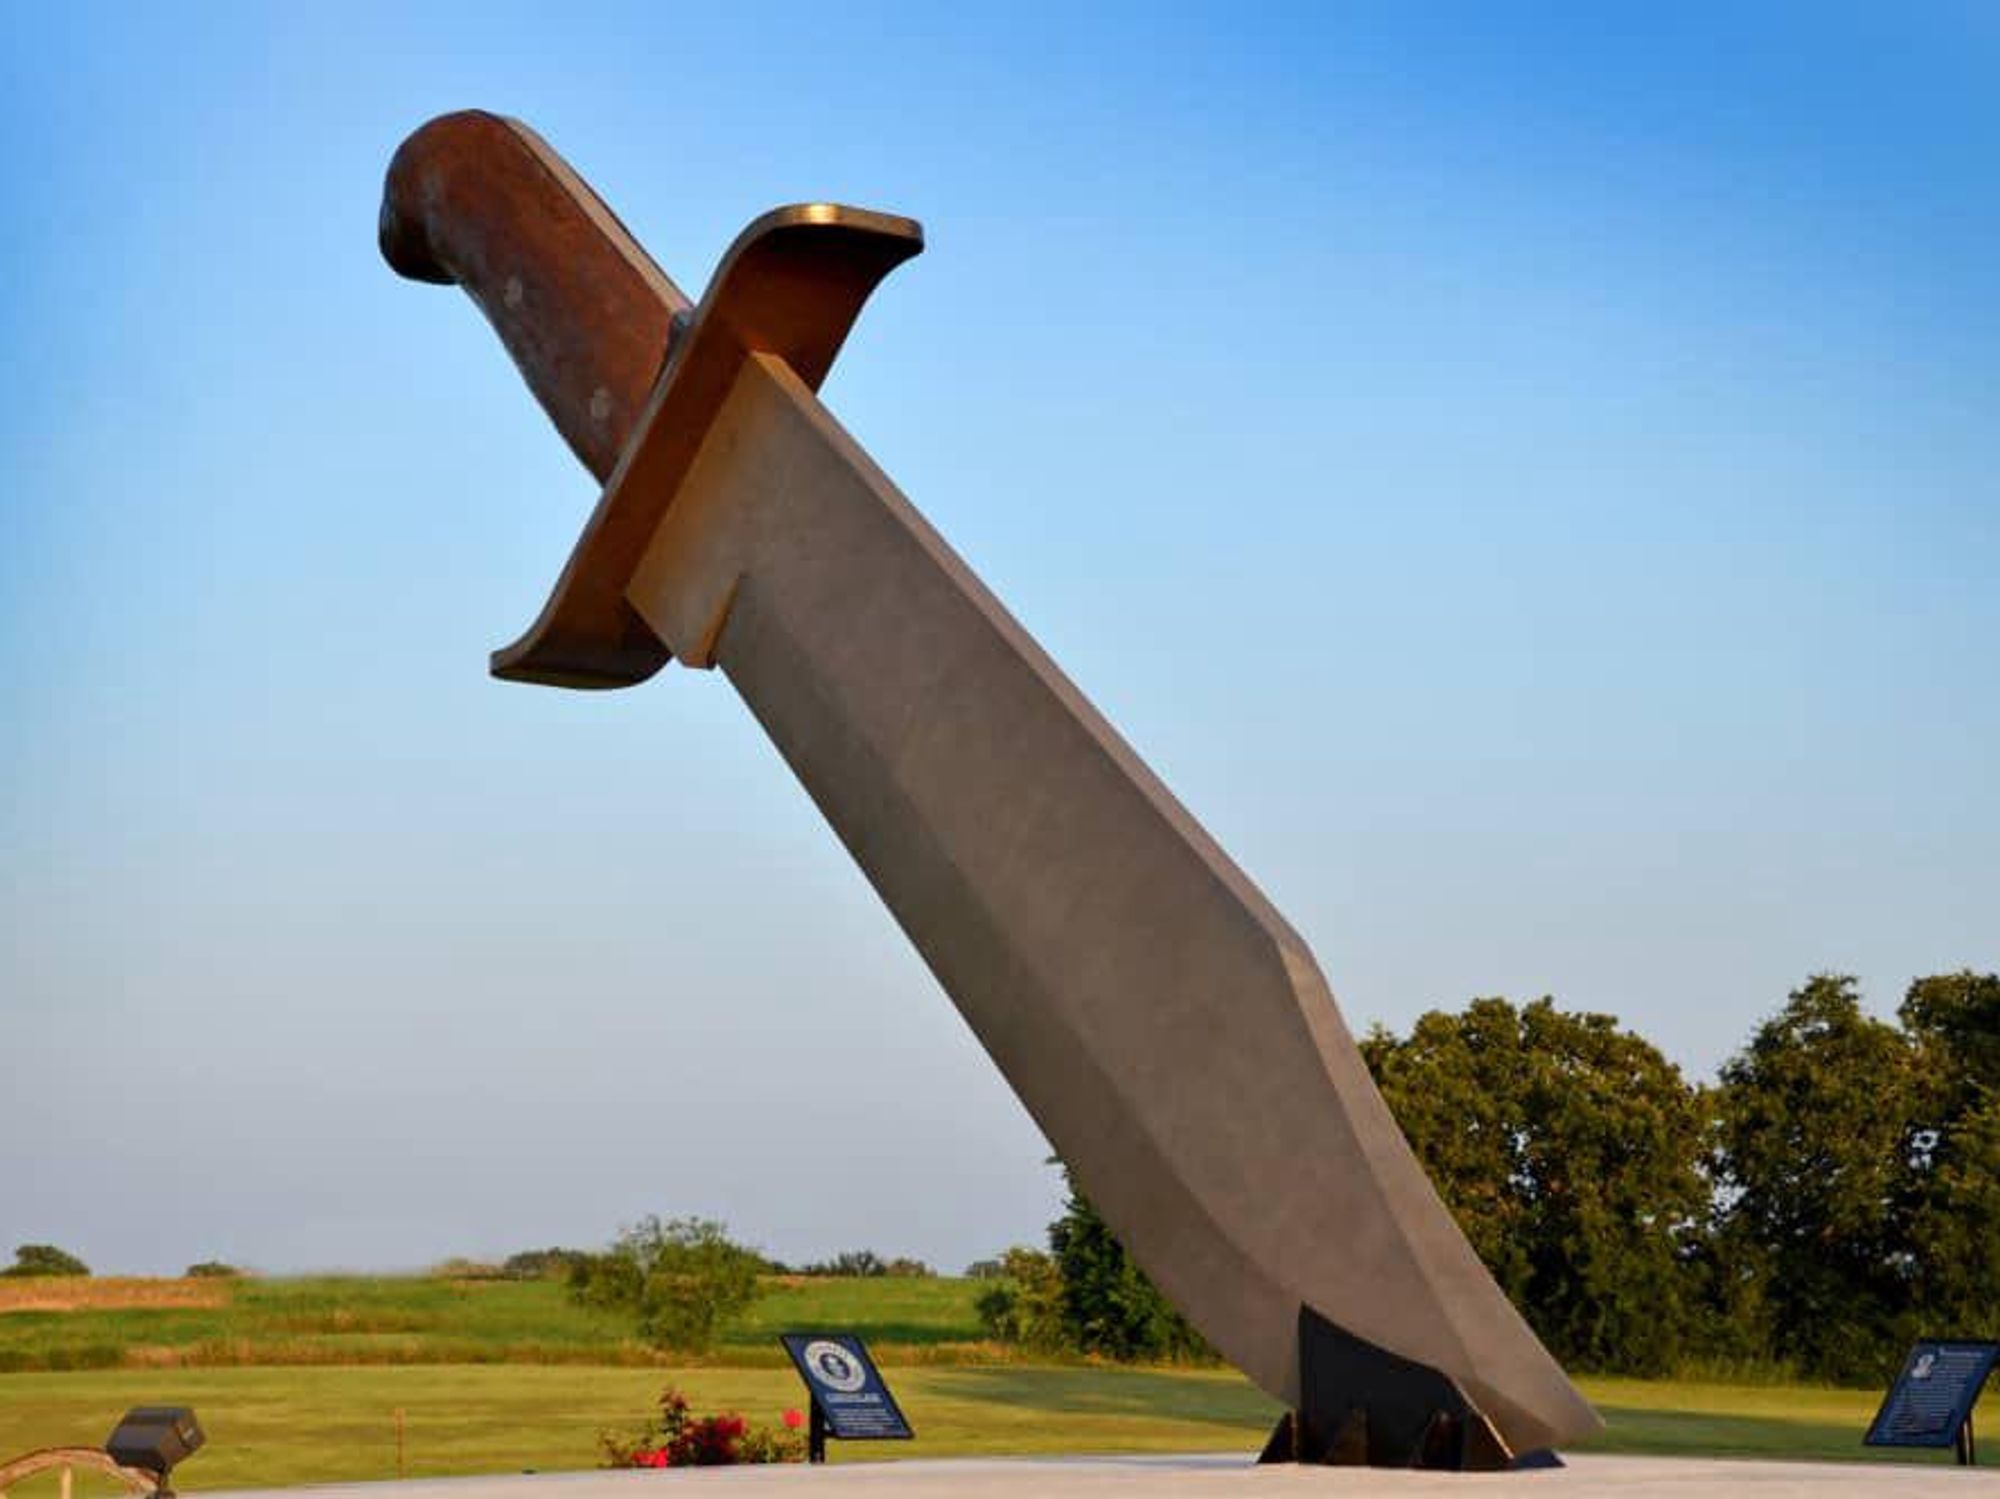 Bowie is home to the World’s Largest Bowie Knife.